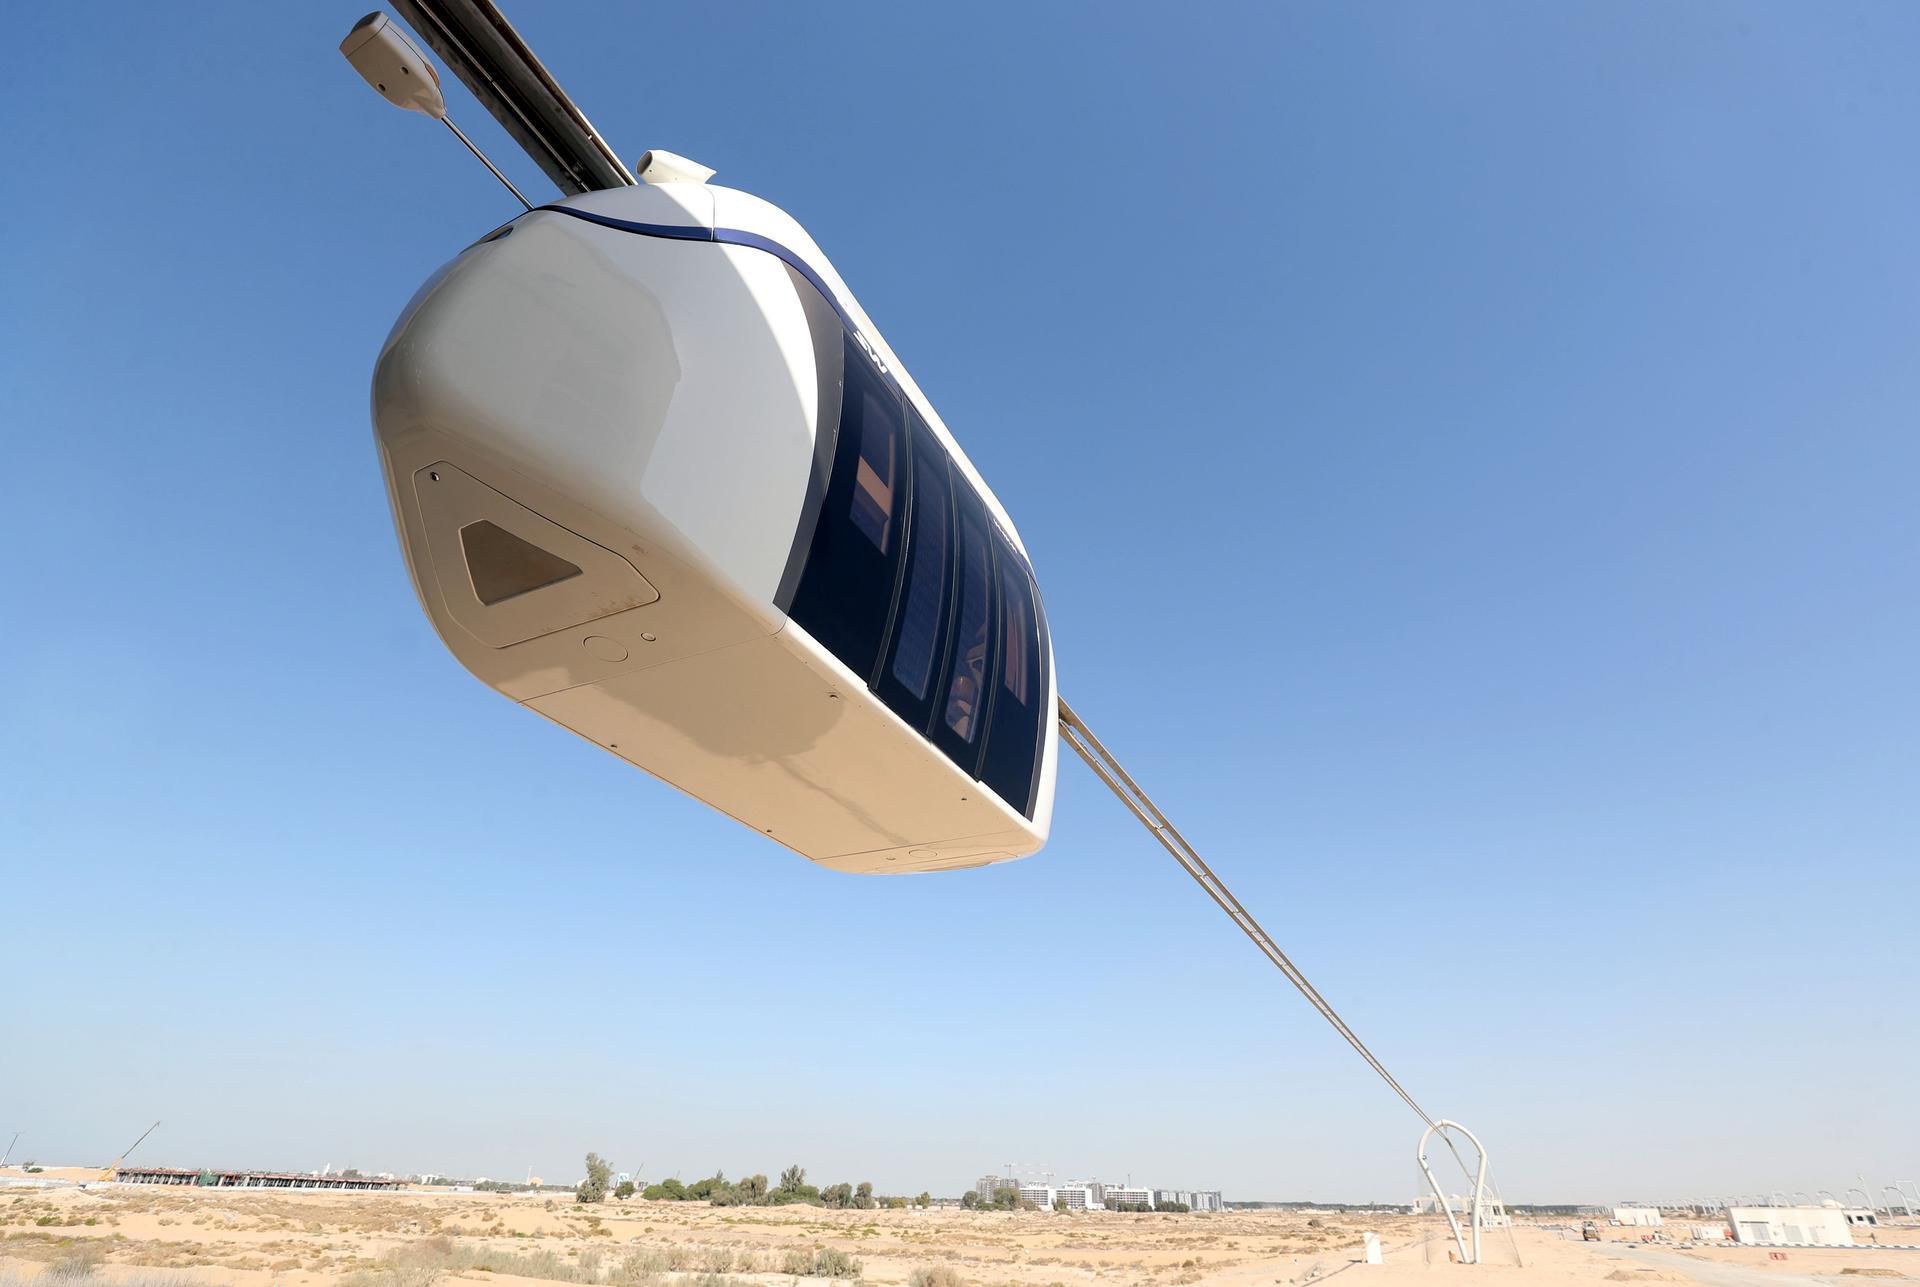 First glimpse of Sharjah’s high-speed electric sky pod